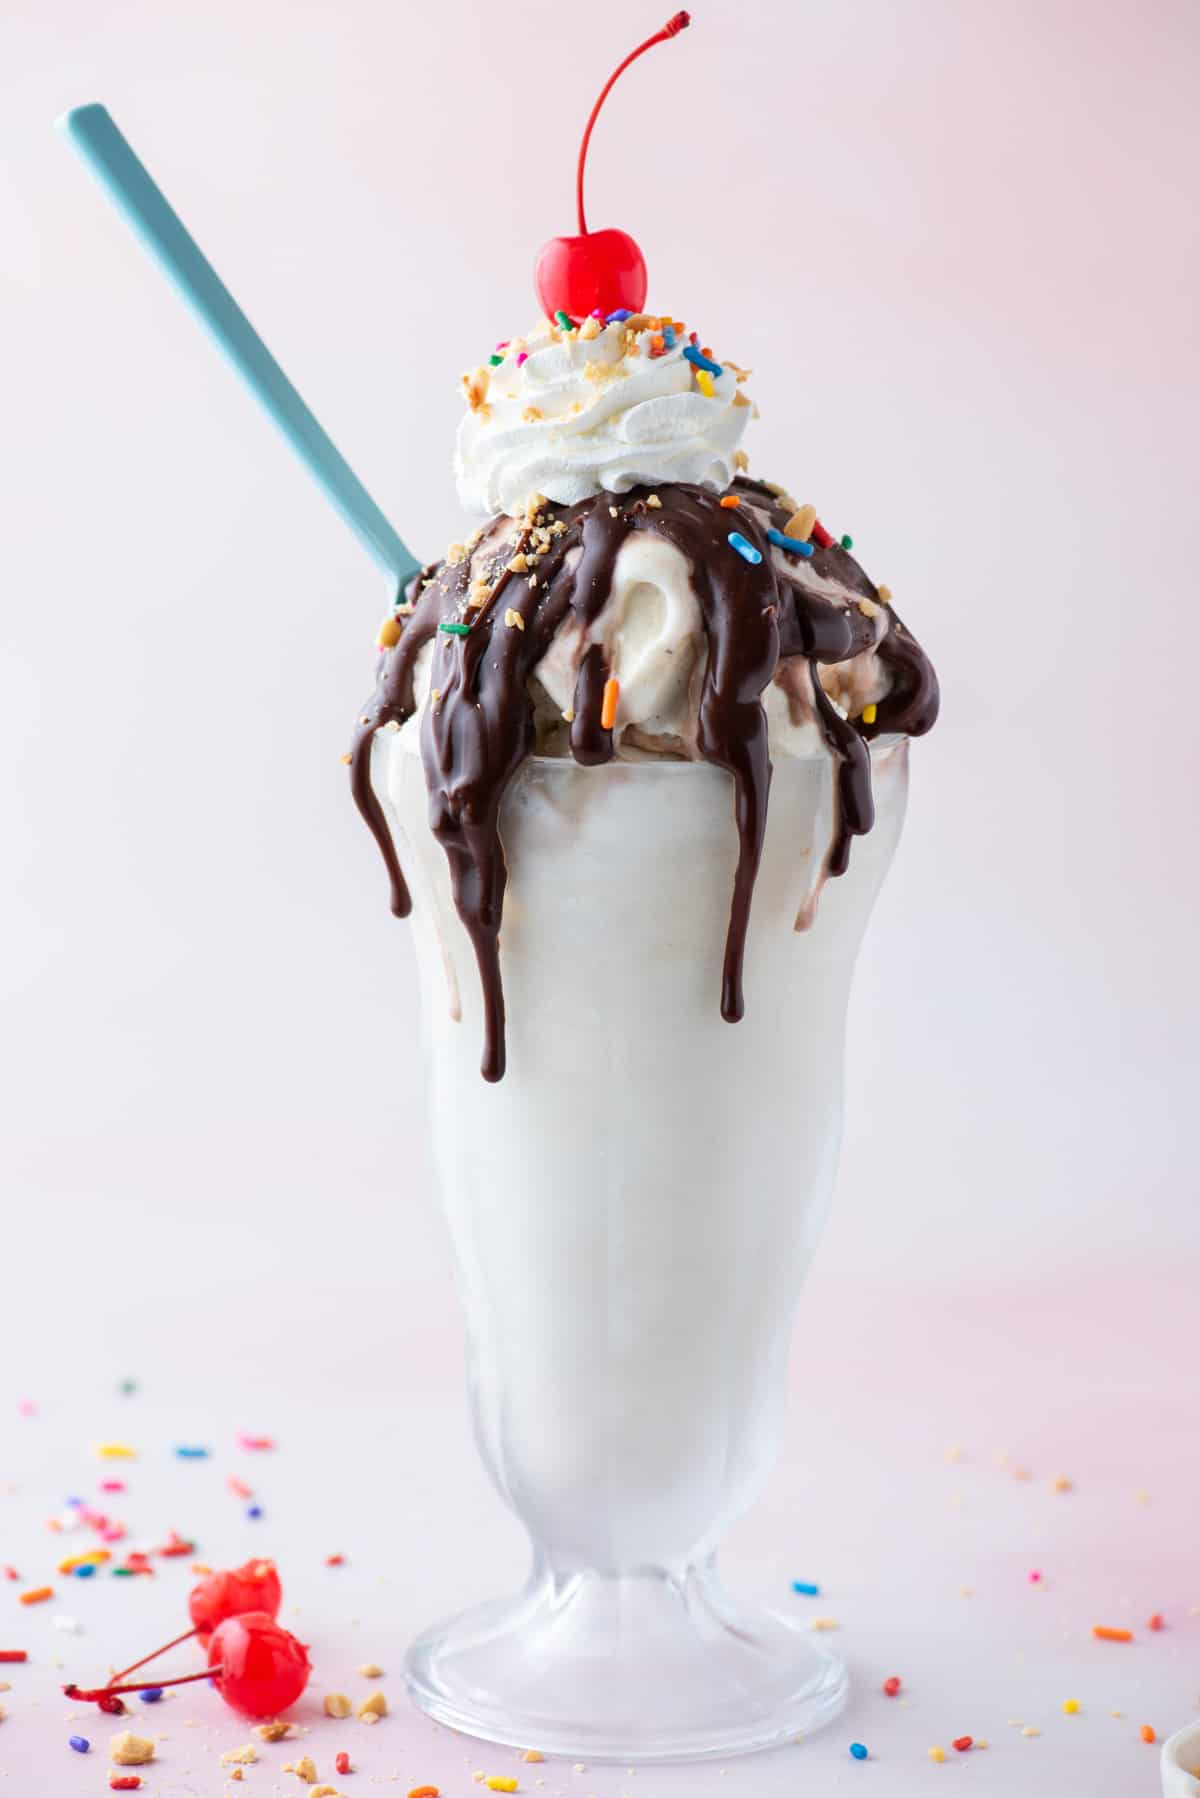 a hot fudge sunday in a tall glass surrounded by sprinkles, bits of peanuts and a couple maraschino cherries with a blue spoon stuck into the side of the sundae